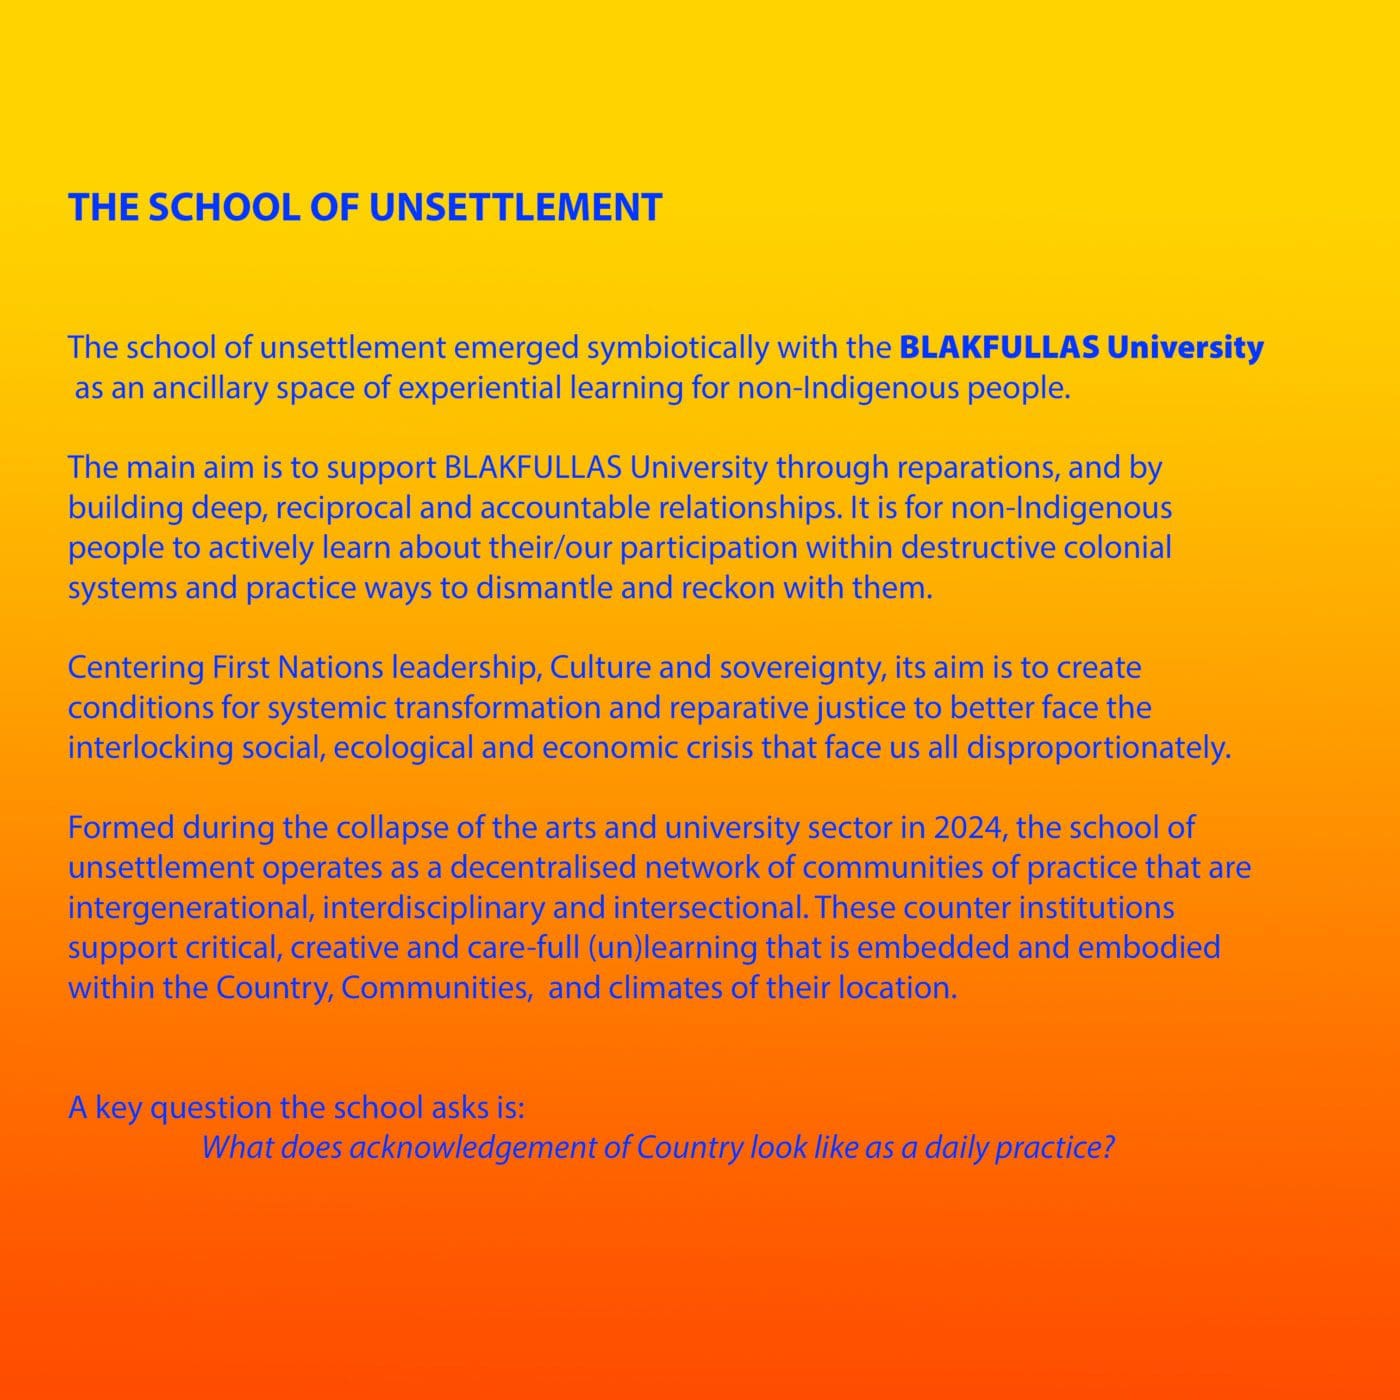 Bright blue text appears on a background that is a gradient from yellow, through orange to red. The text reads: THE SCHOOL OF UNSETTLEMENT The school of unsettlement emerged symbiotically with the BLAKFULLAS University as an ancillary space of experiential learning for non-Indigenous people. The main aim is to support BLAKFULLAS University through reparations, and by building deep, reciprocal and accountable relationships. It is for non-Indigenous people to actively learn about their/our participation within destructive colonial systems and practice ways to dismantle and reckon with them. Centering First Nations leadership, Culture and sovereignty, its aim is to create conditions for systemic transformation and reparative justice to better face the interlocking social, ecological and economic crisis that face us all disproportionately. Formed during the collapse of the arts and university sector in 2024, the school of unsettlement operates as a decentralised network of communities of practice that are intergenerational, interdisciplinary and intersectional. These counter institutions support critical, creative and care-full (un)learning that is embedded and embodied within the Country, Communities, and climates of their location. A key question the school asks is: ' What does acknowledgement of Country look like as a daily practice?'